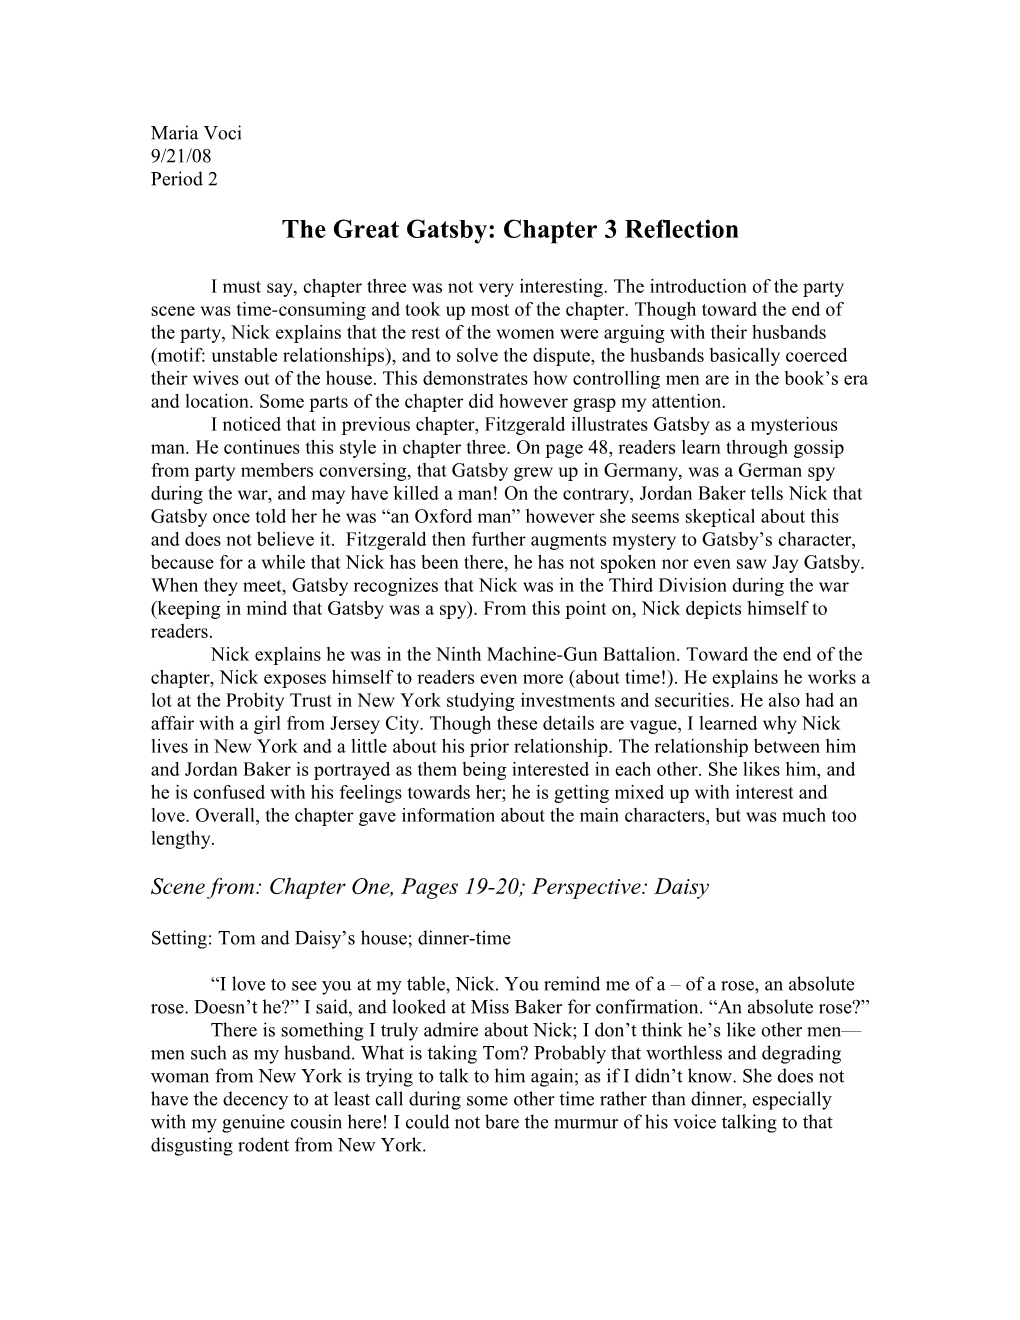 The Great Gatsby: Chapter 3 Reflection